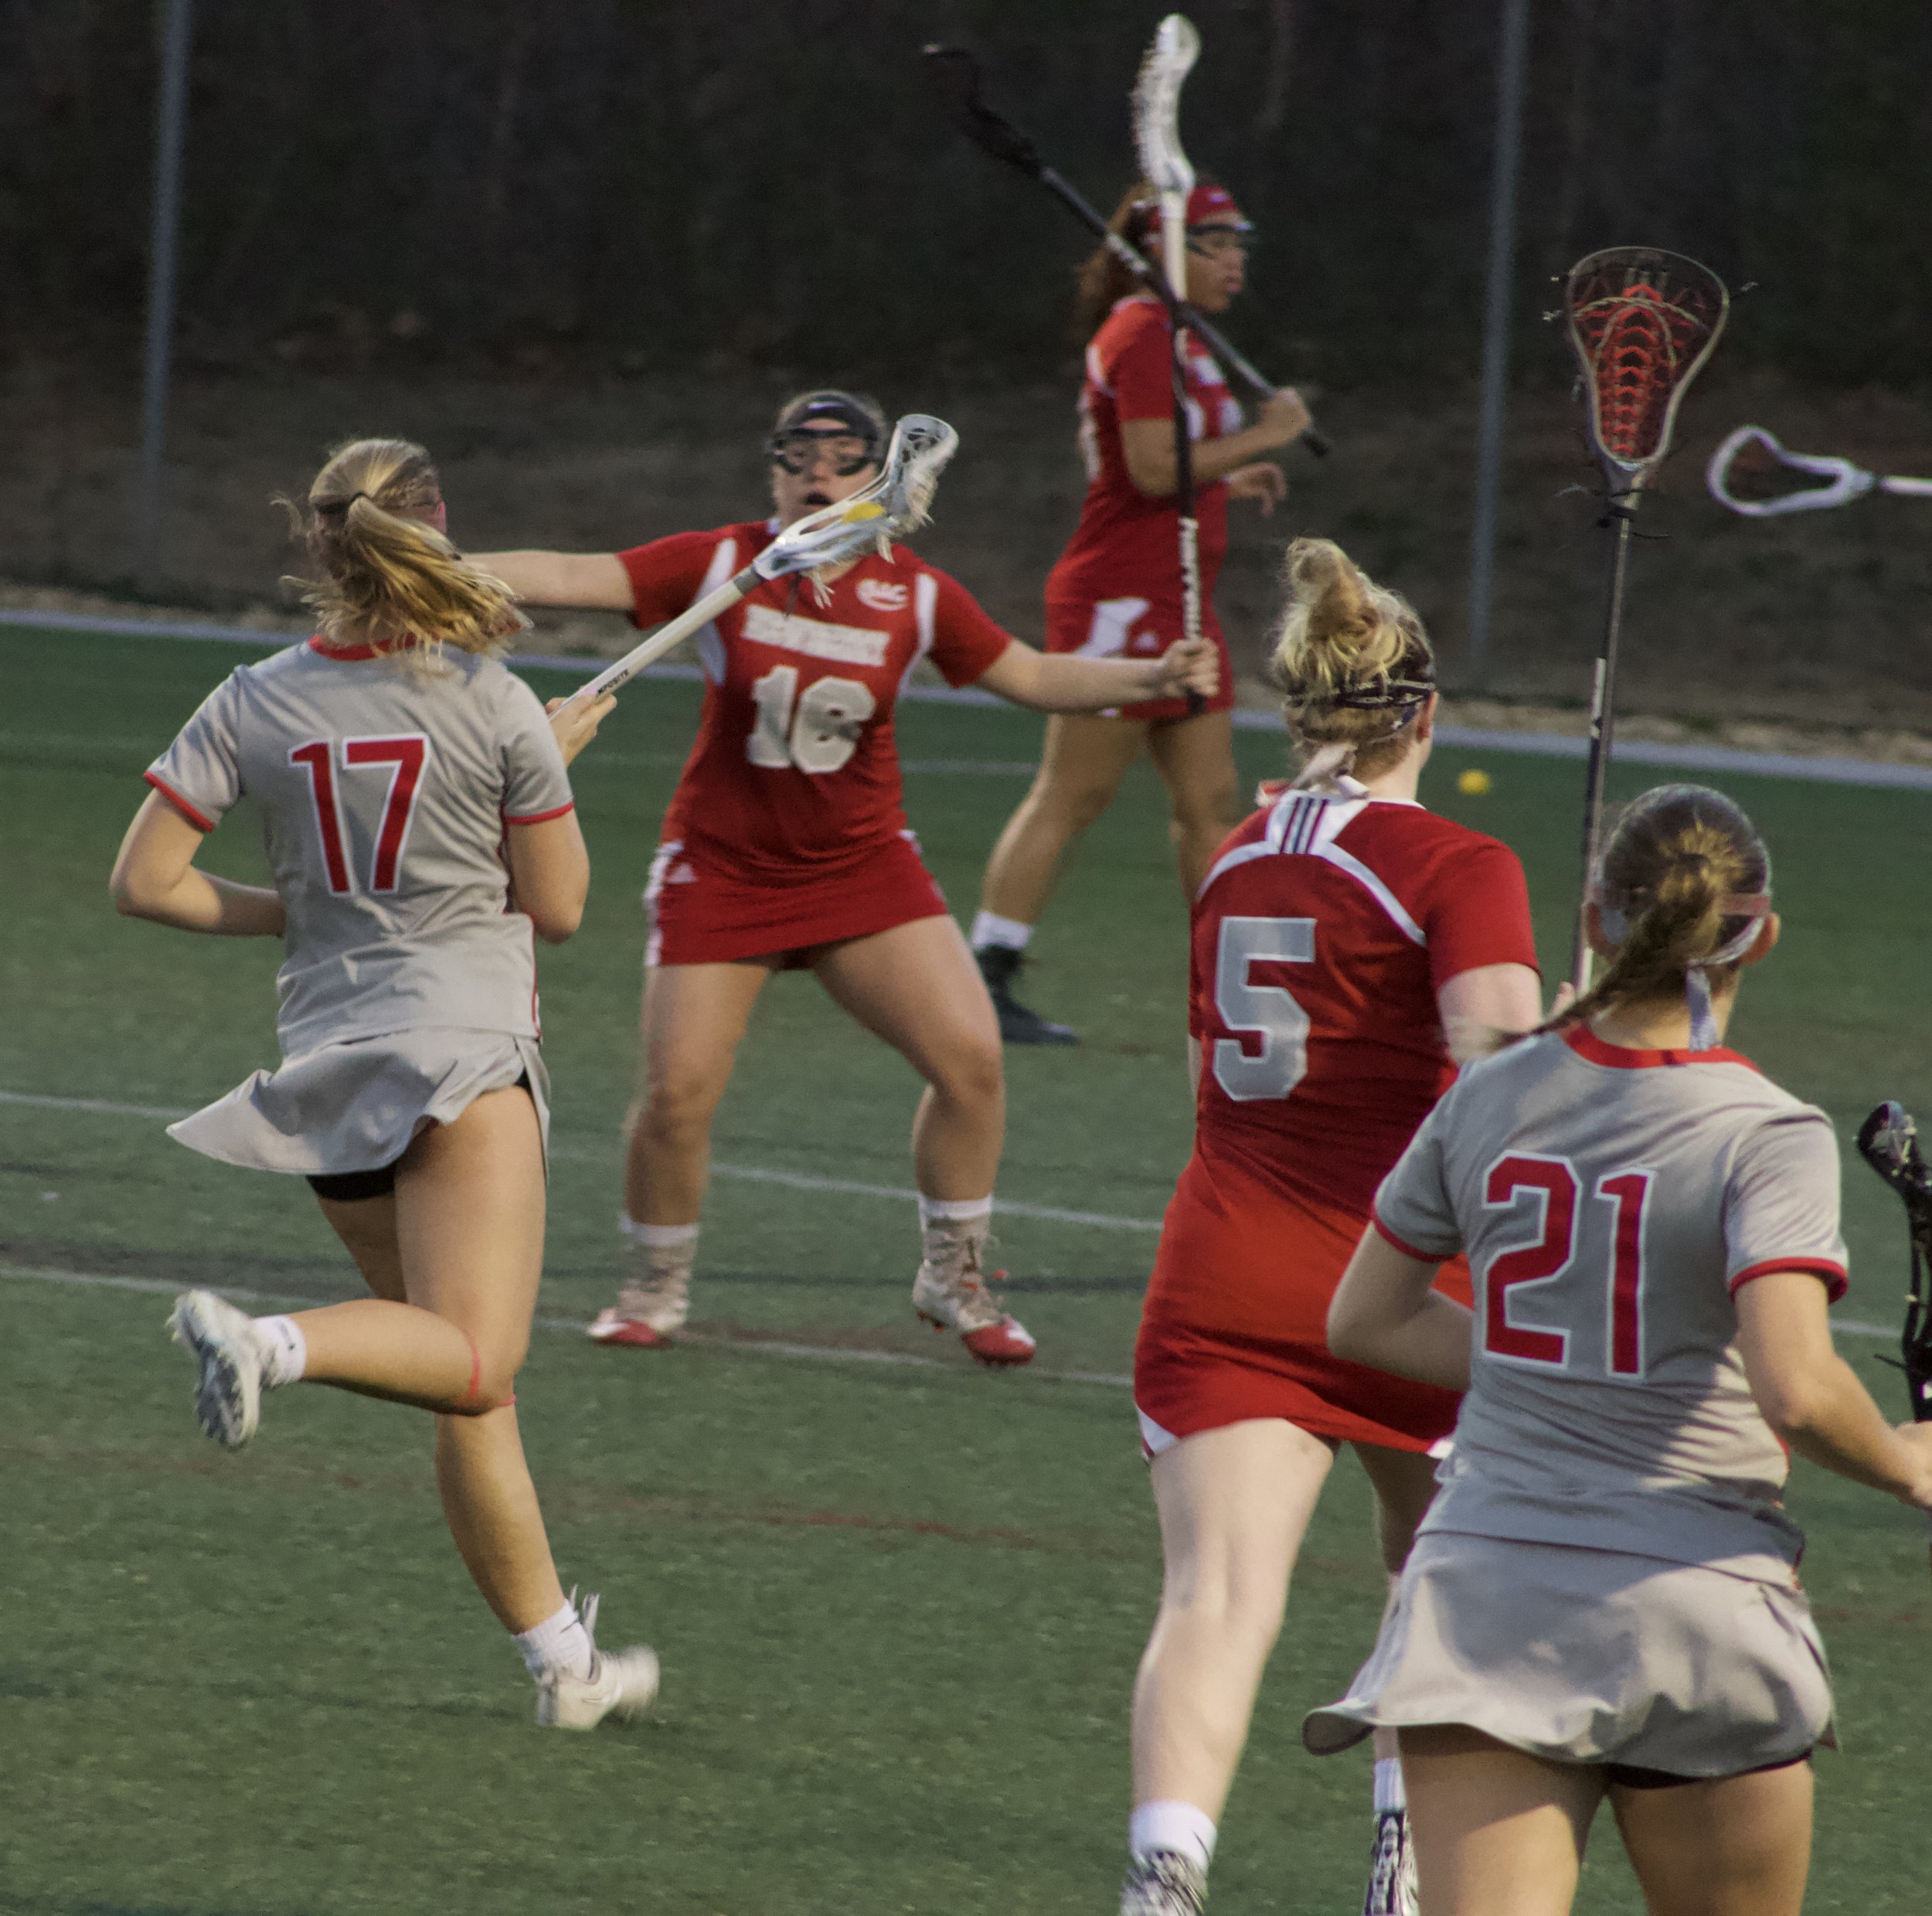 As the game began, NGU was quick to take over possessions. Here is #17 Jillian Chiesa taking over the feild and racing to score.&nbsp;